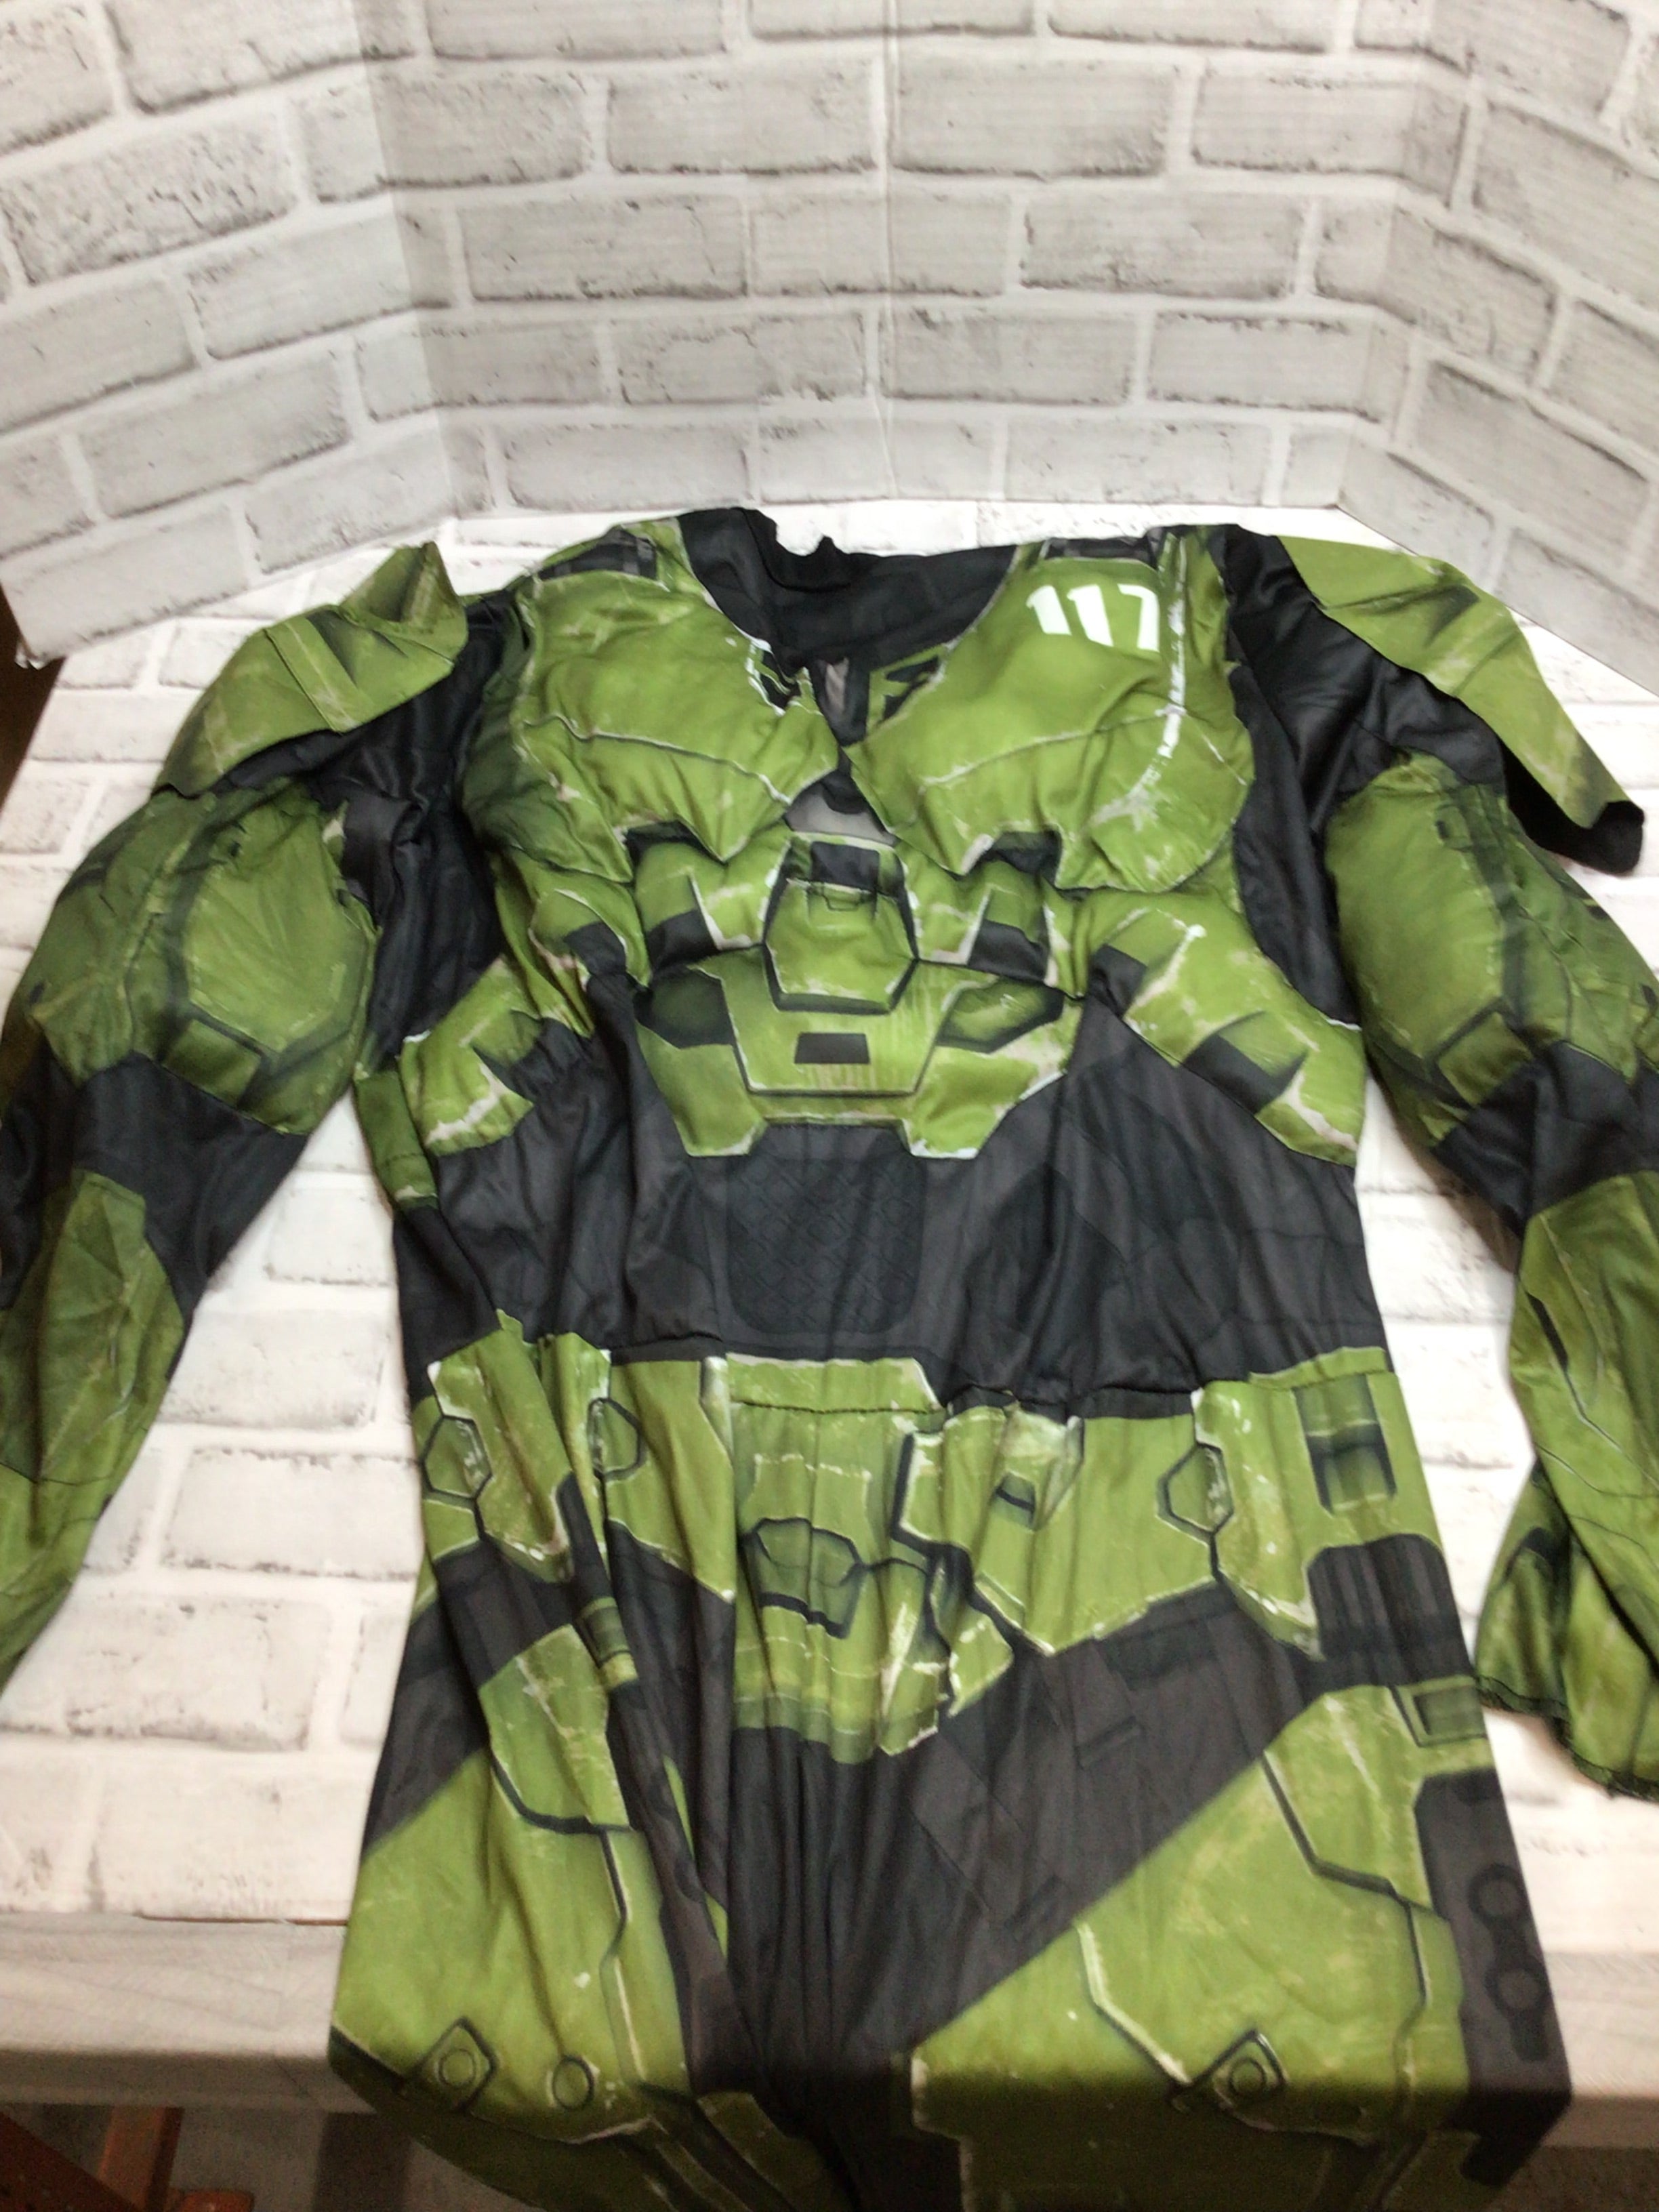 Halo Infinite Master Chief Adult Costume Size L-XL (42-46) (8088193794286)